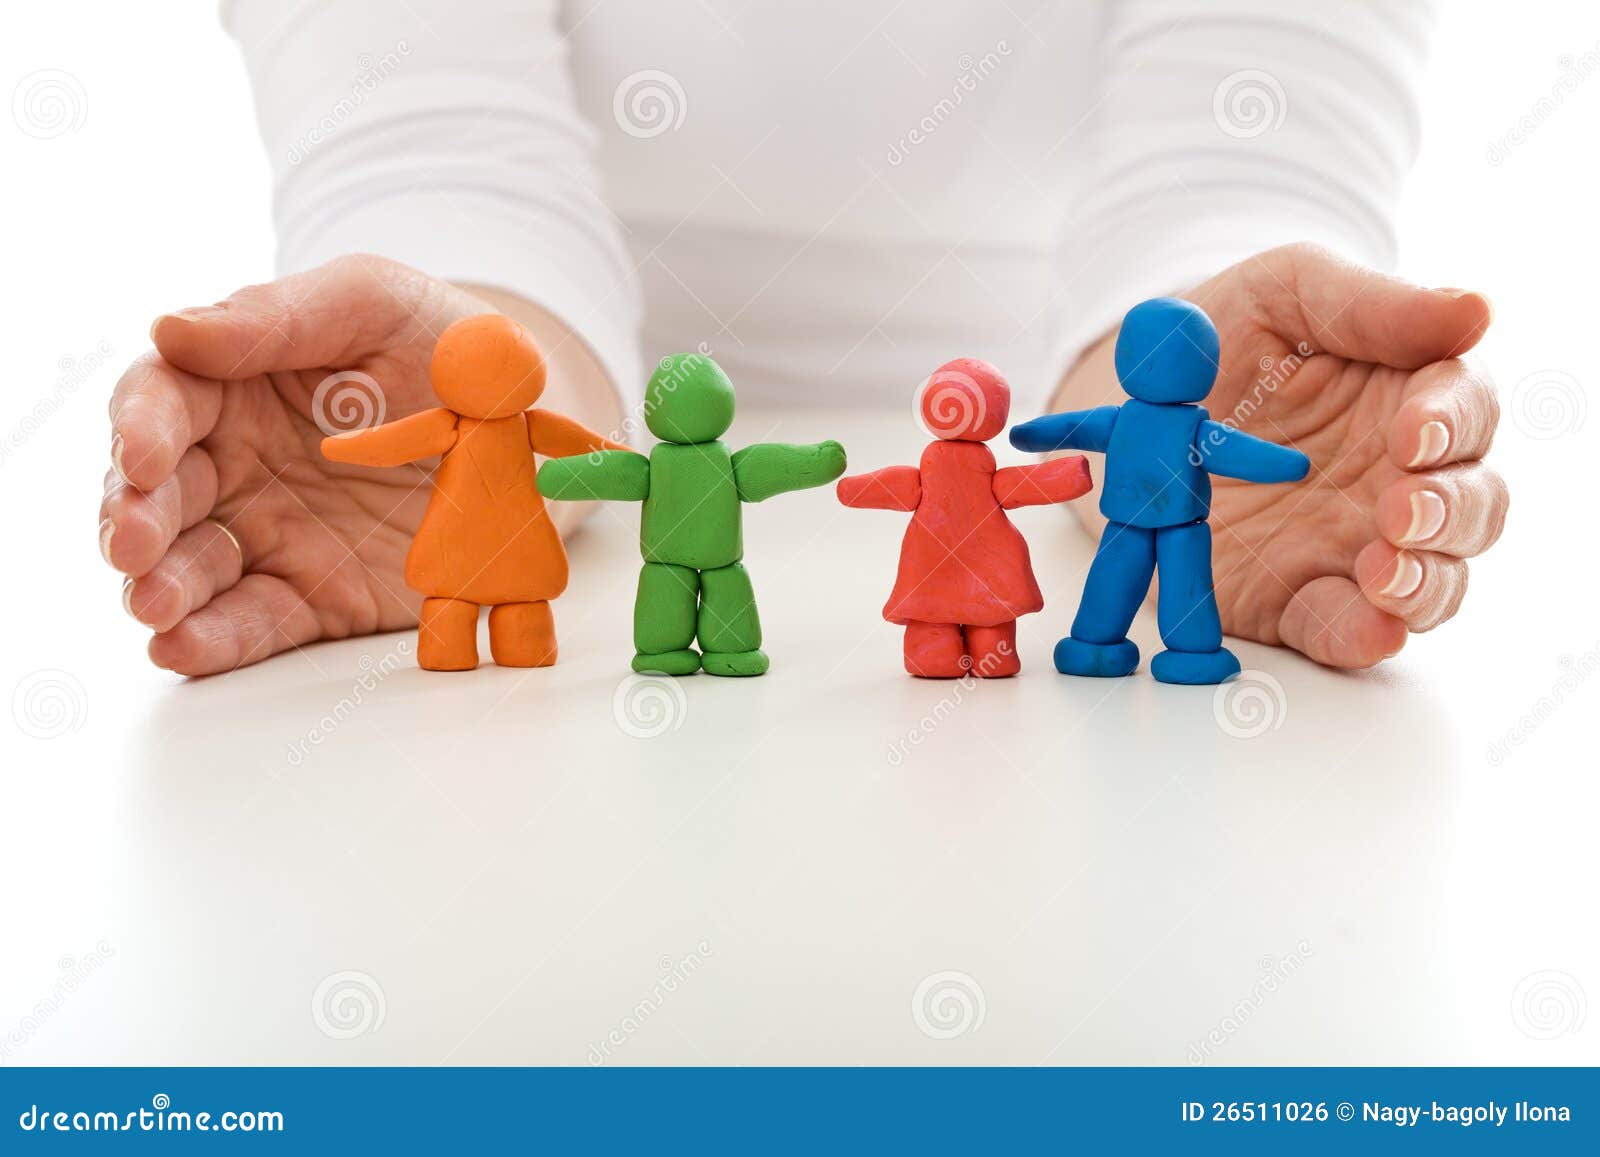 clay people family protected by woman hands